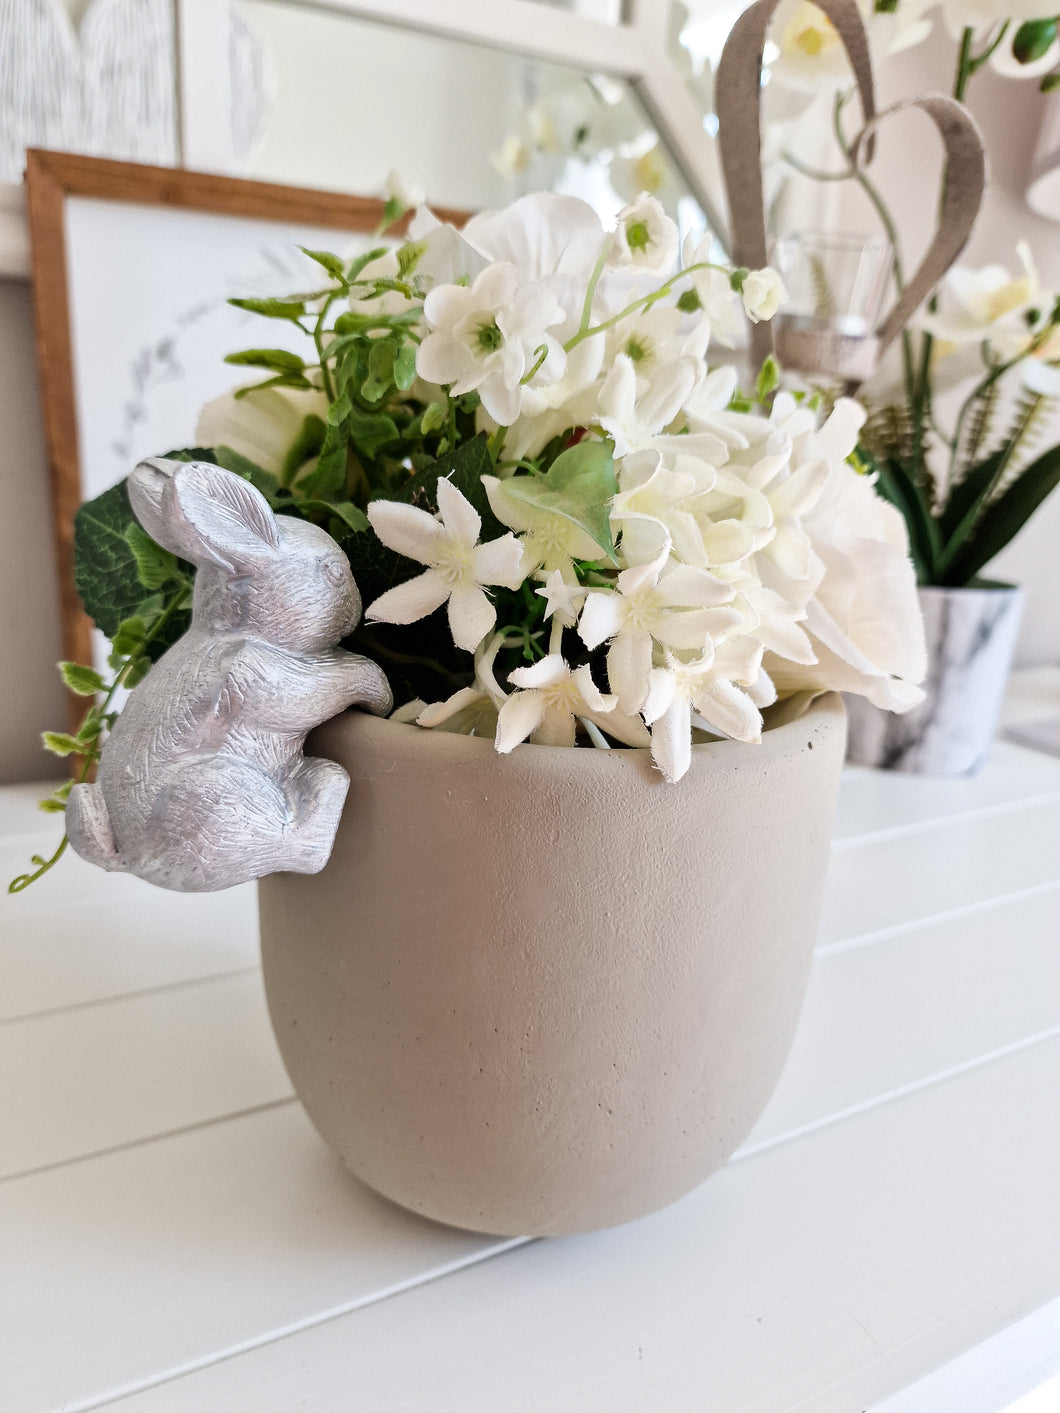 Grey Cement Planter With Silver Bunny Hanger